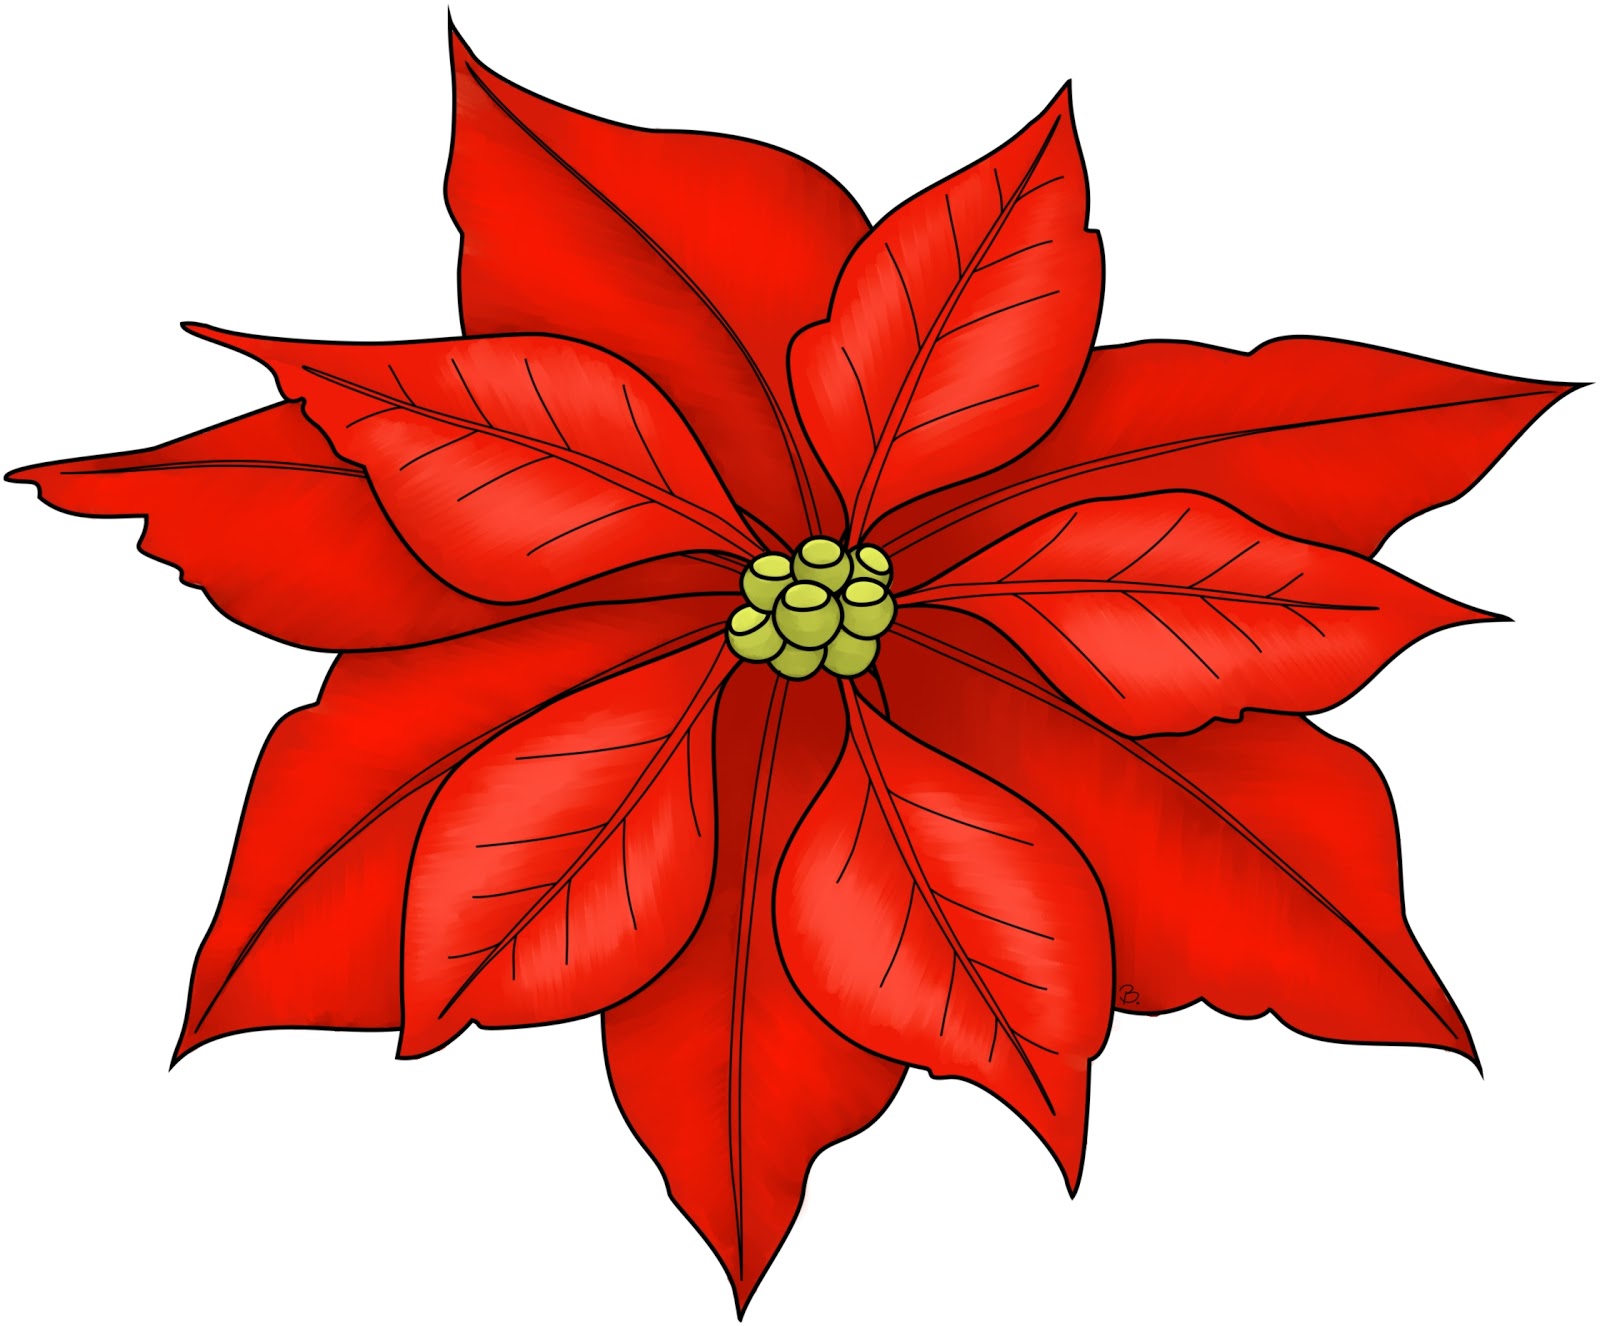 Clip Arts Related To : christmas flowers transparent background. view all P...